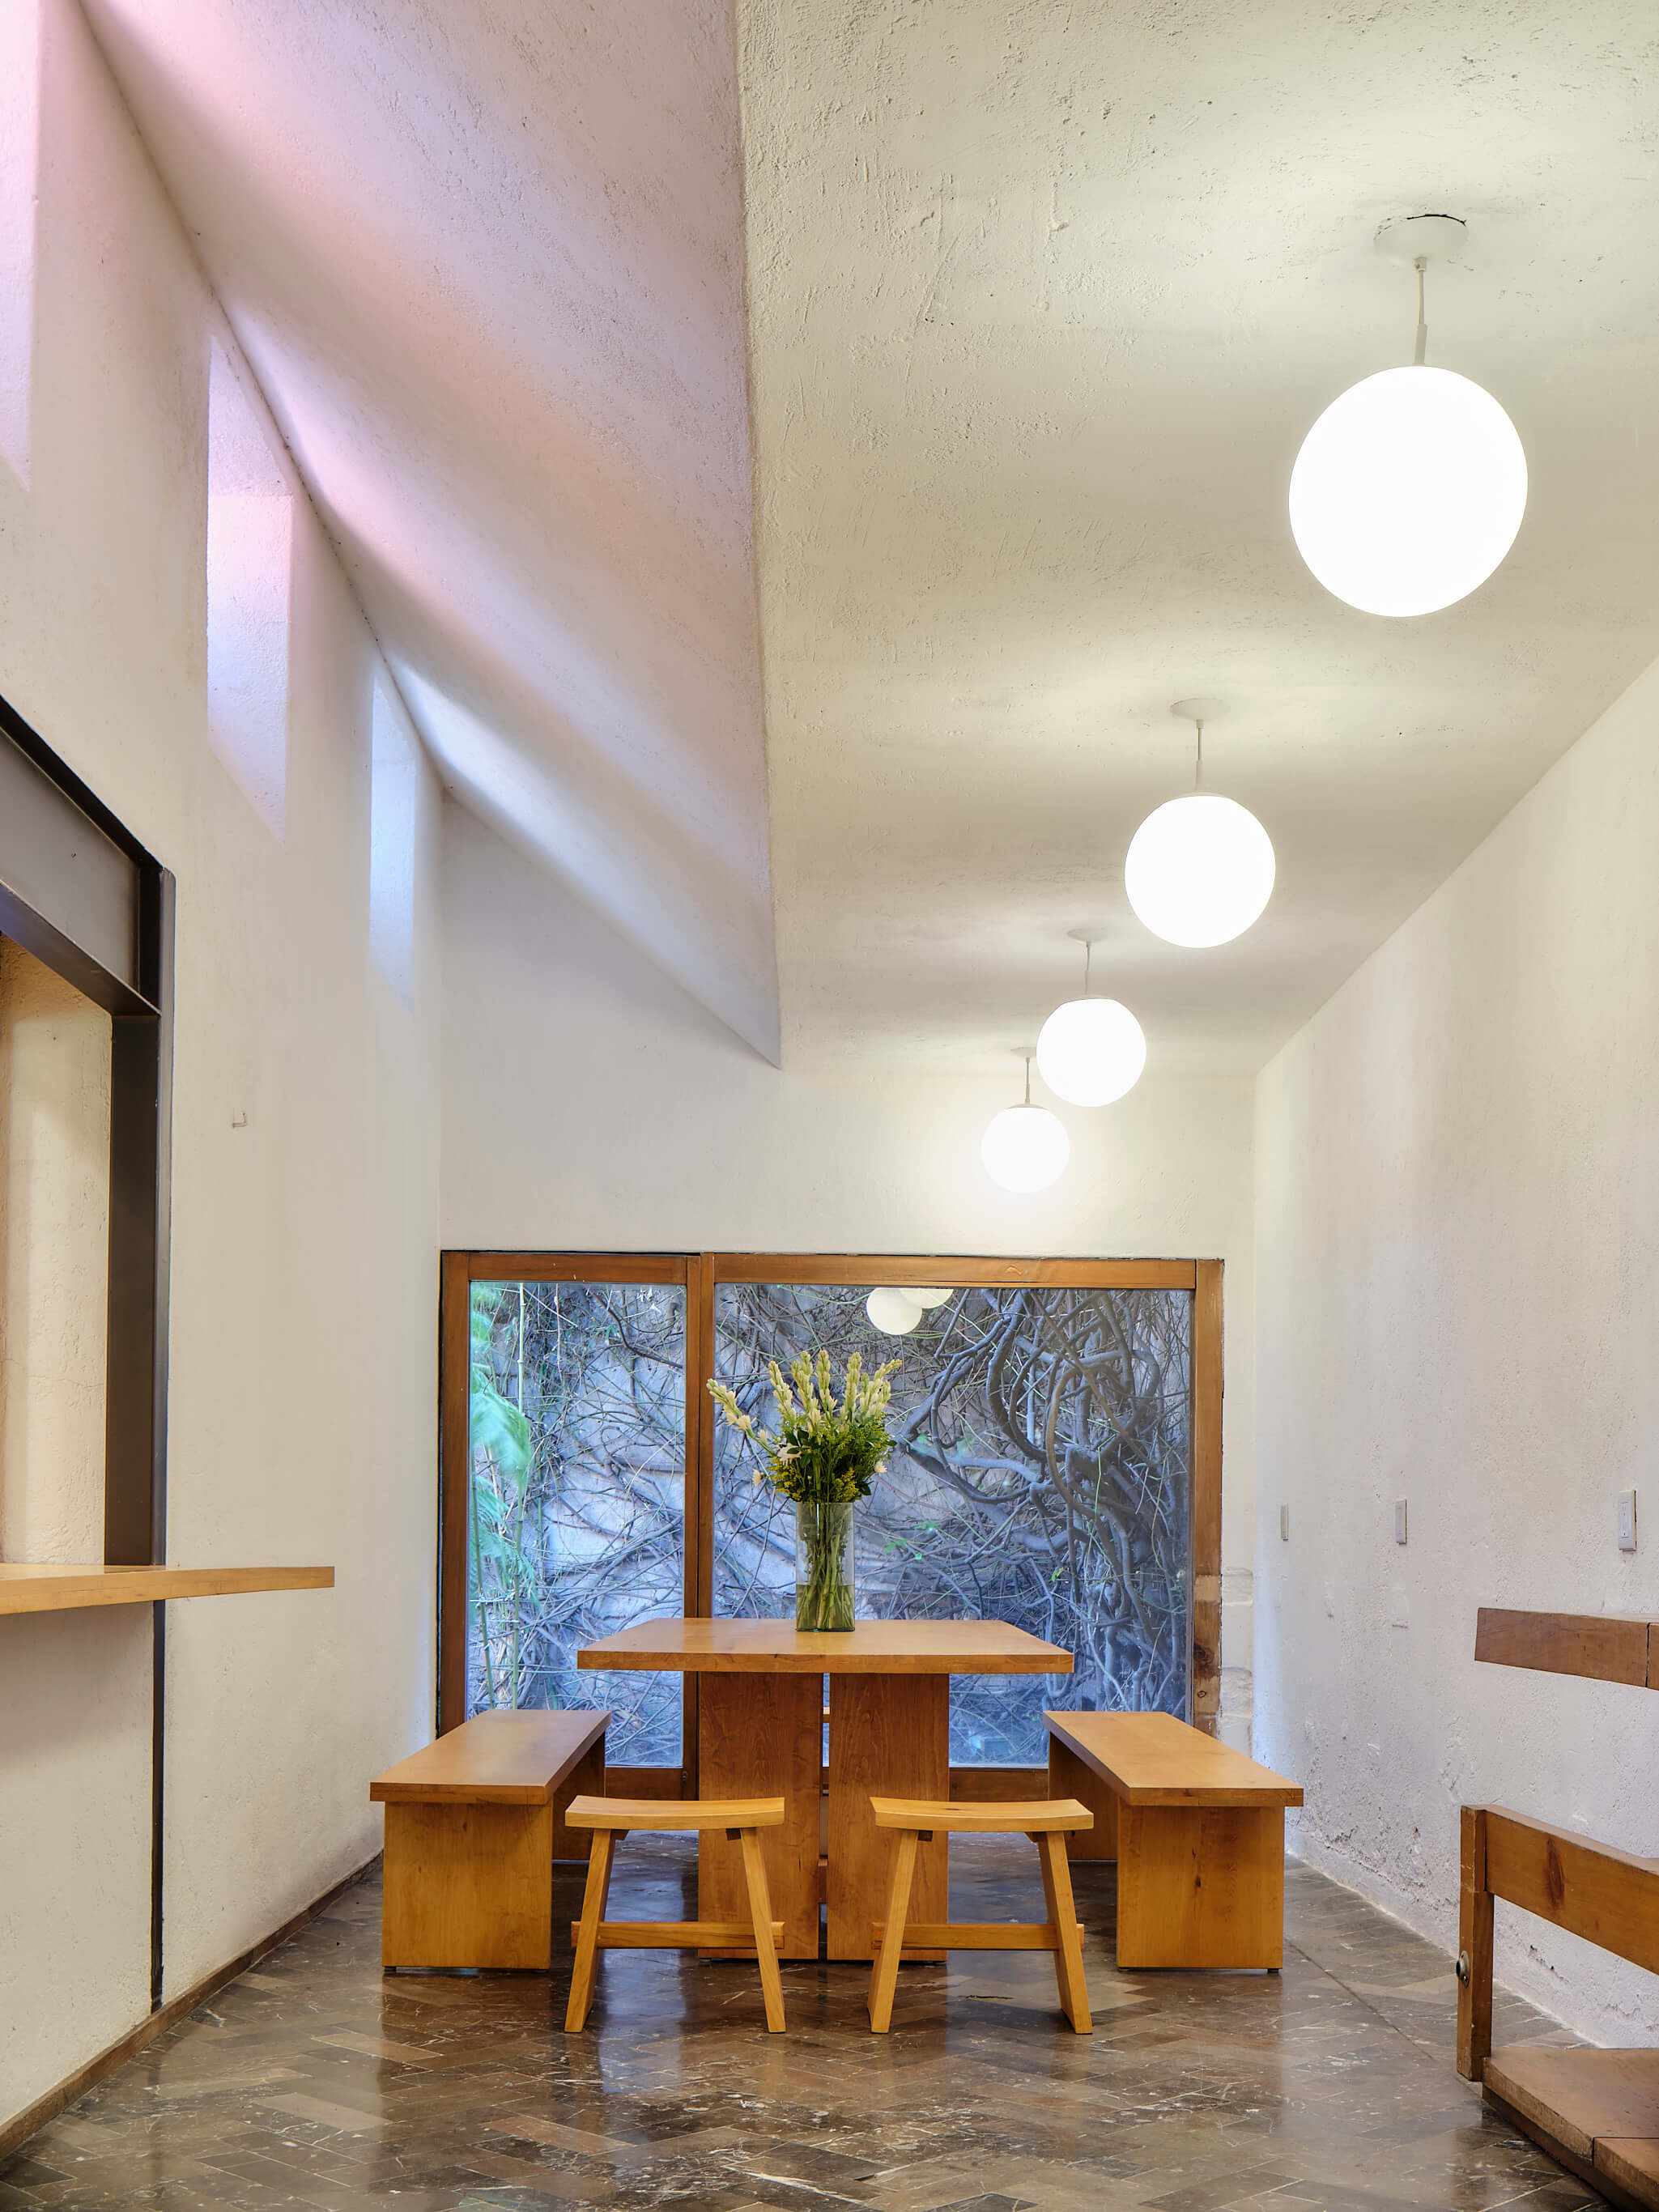 A simple dining room with a slanted roof and wooden table and chairs